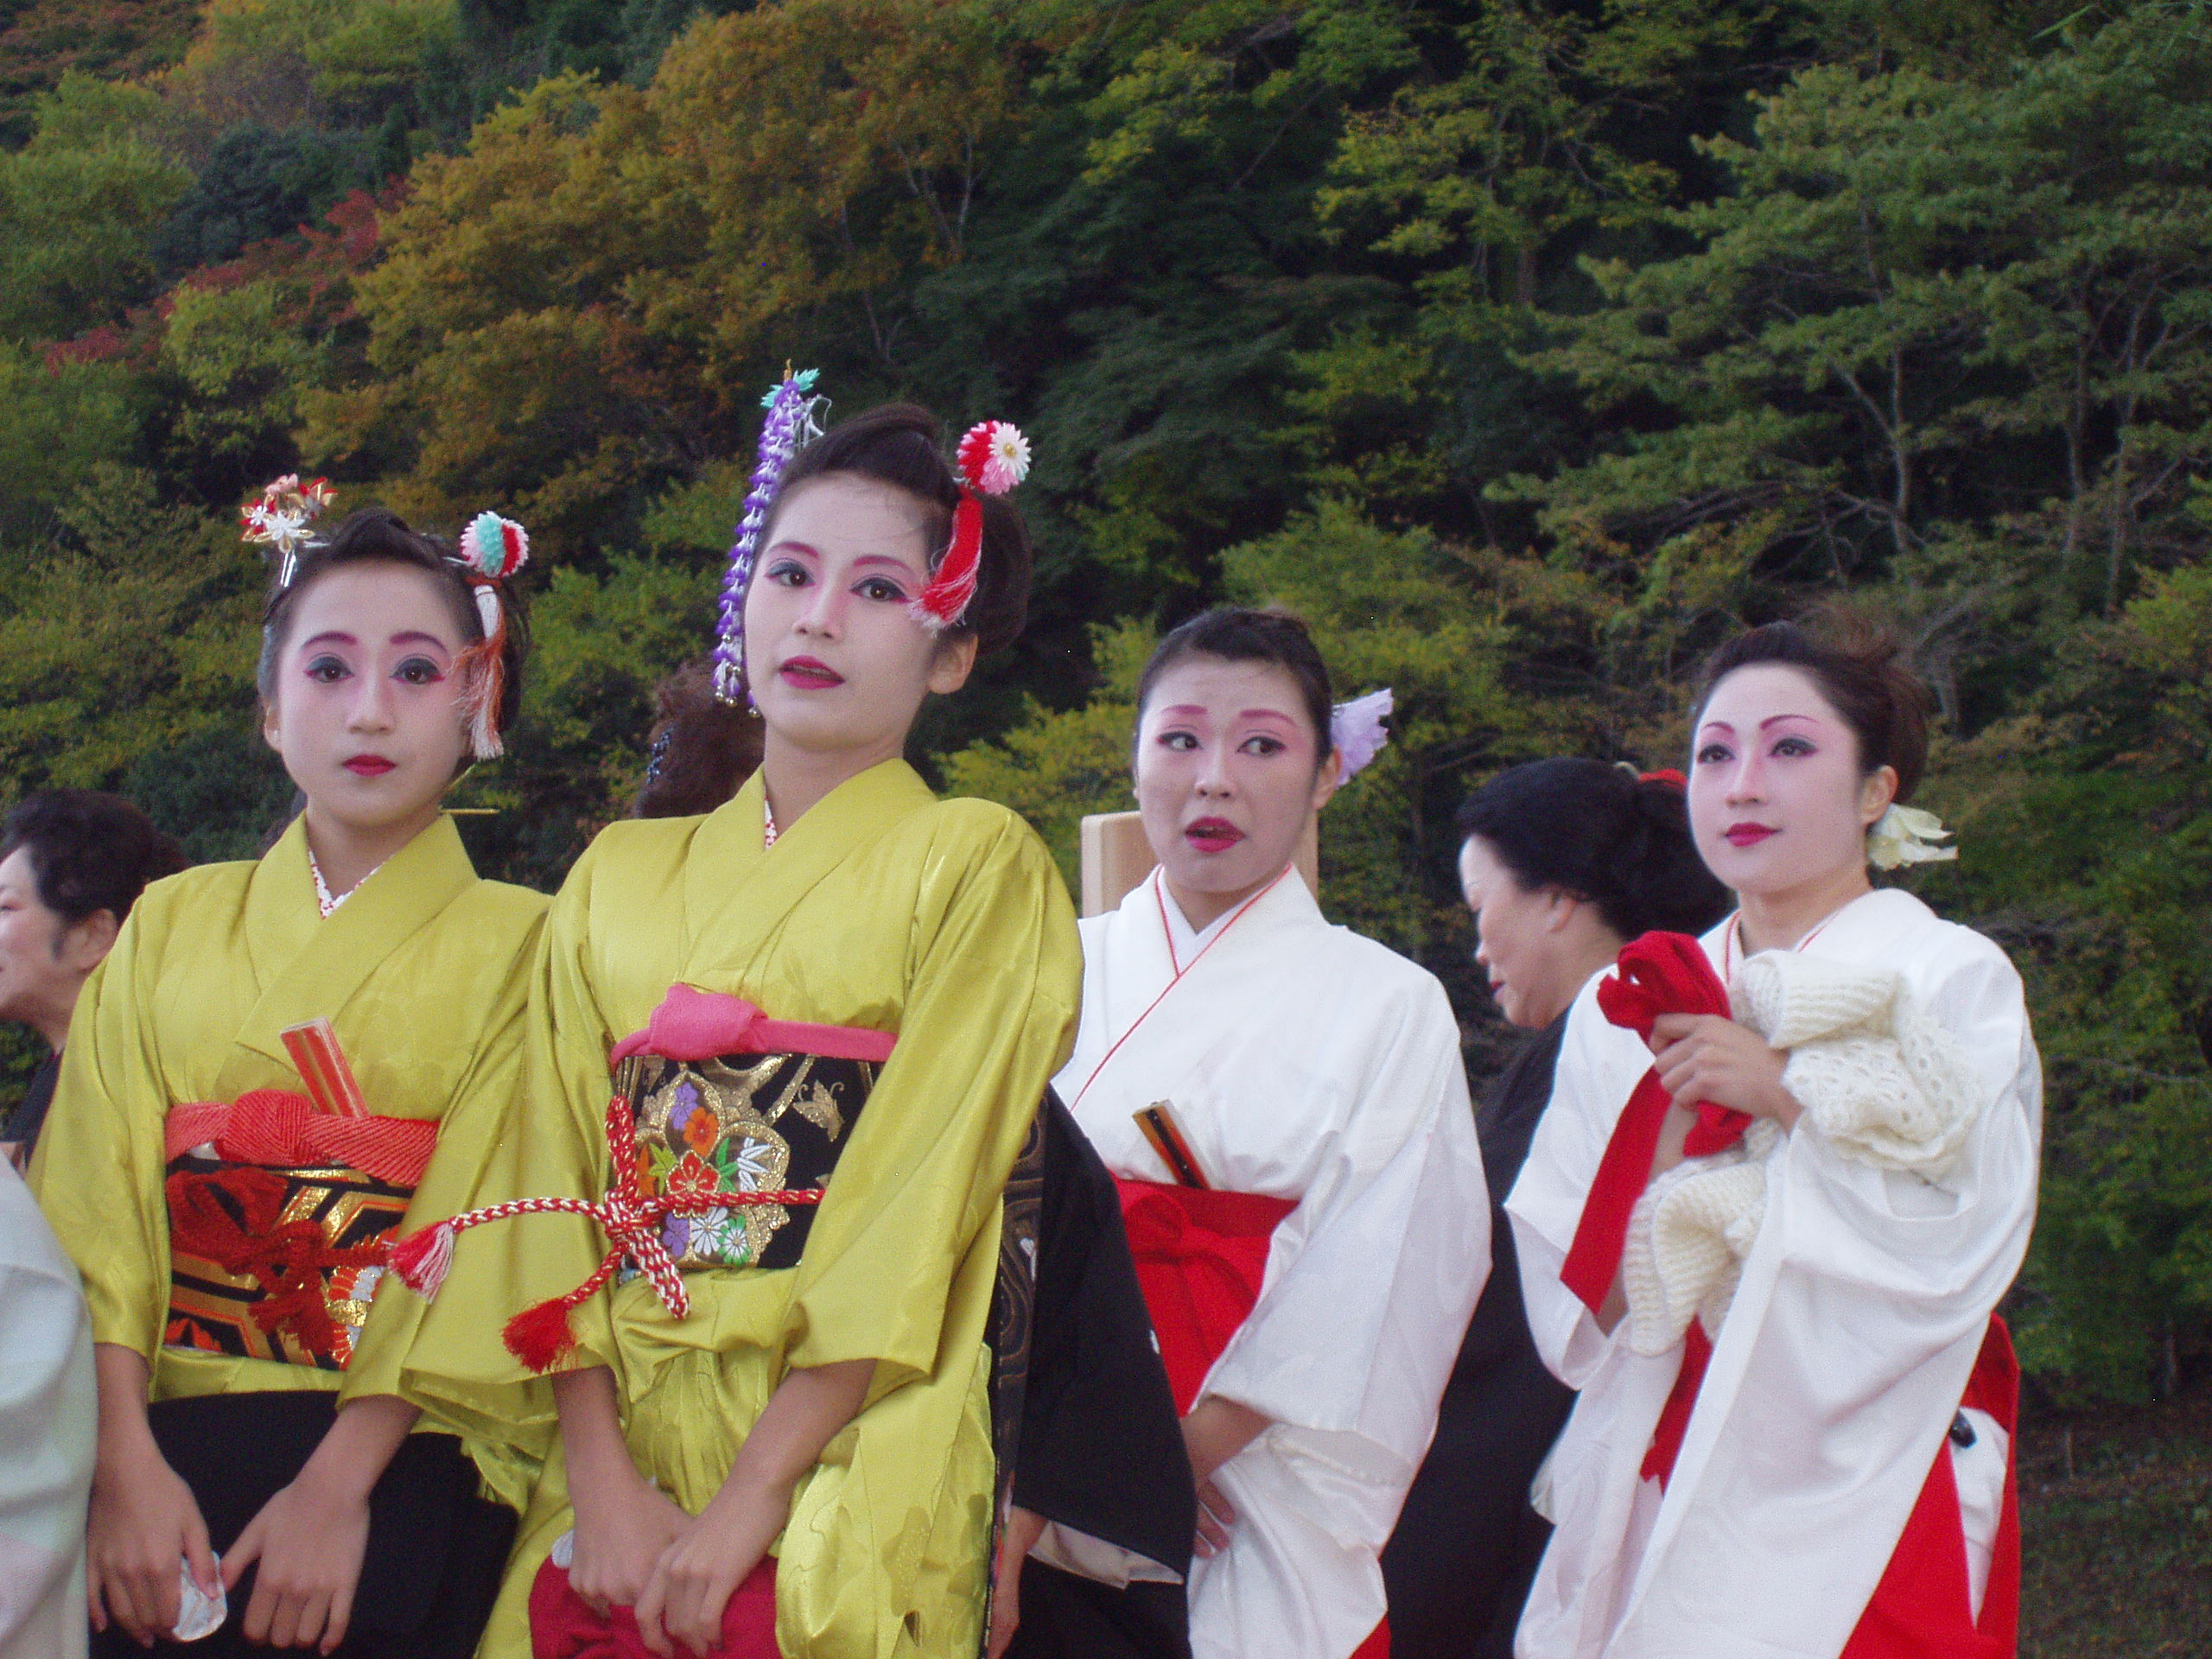 attending one of the traditional festivals near Kyoto